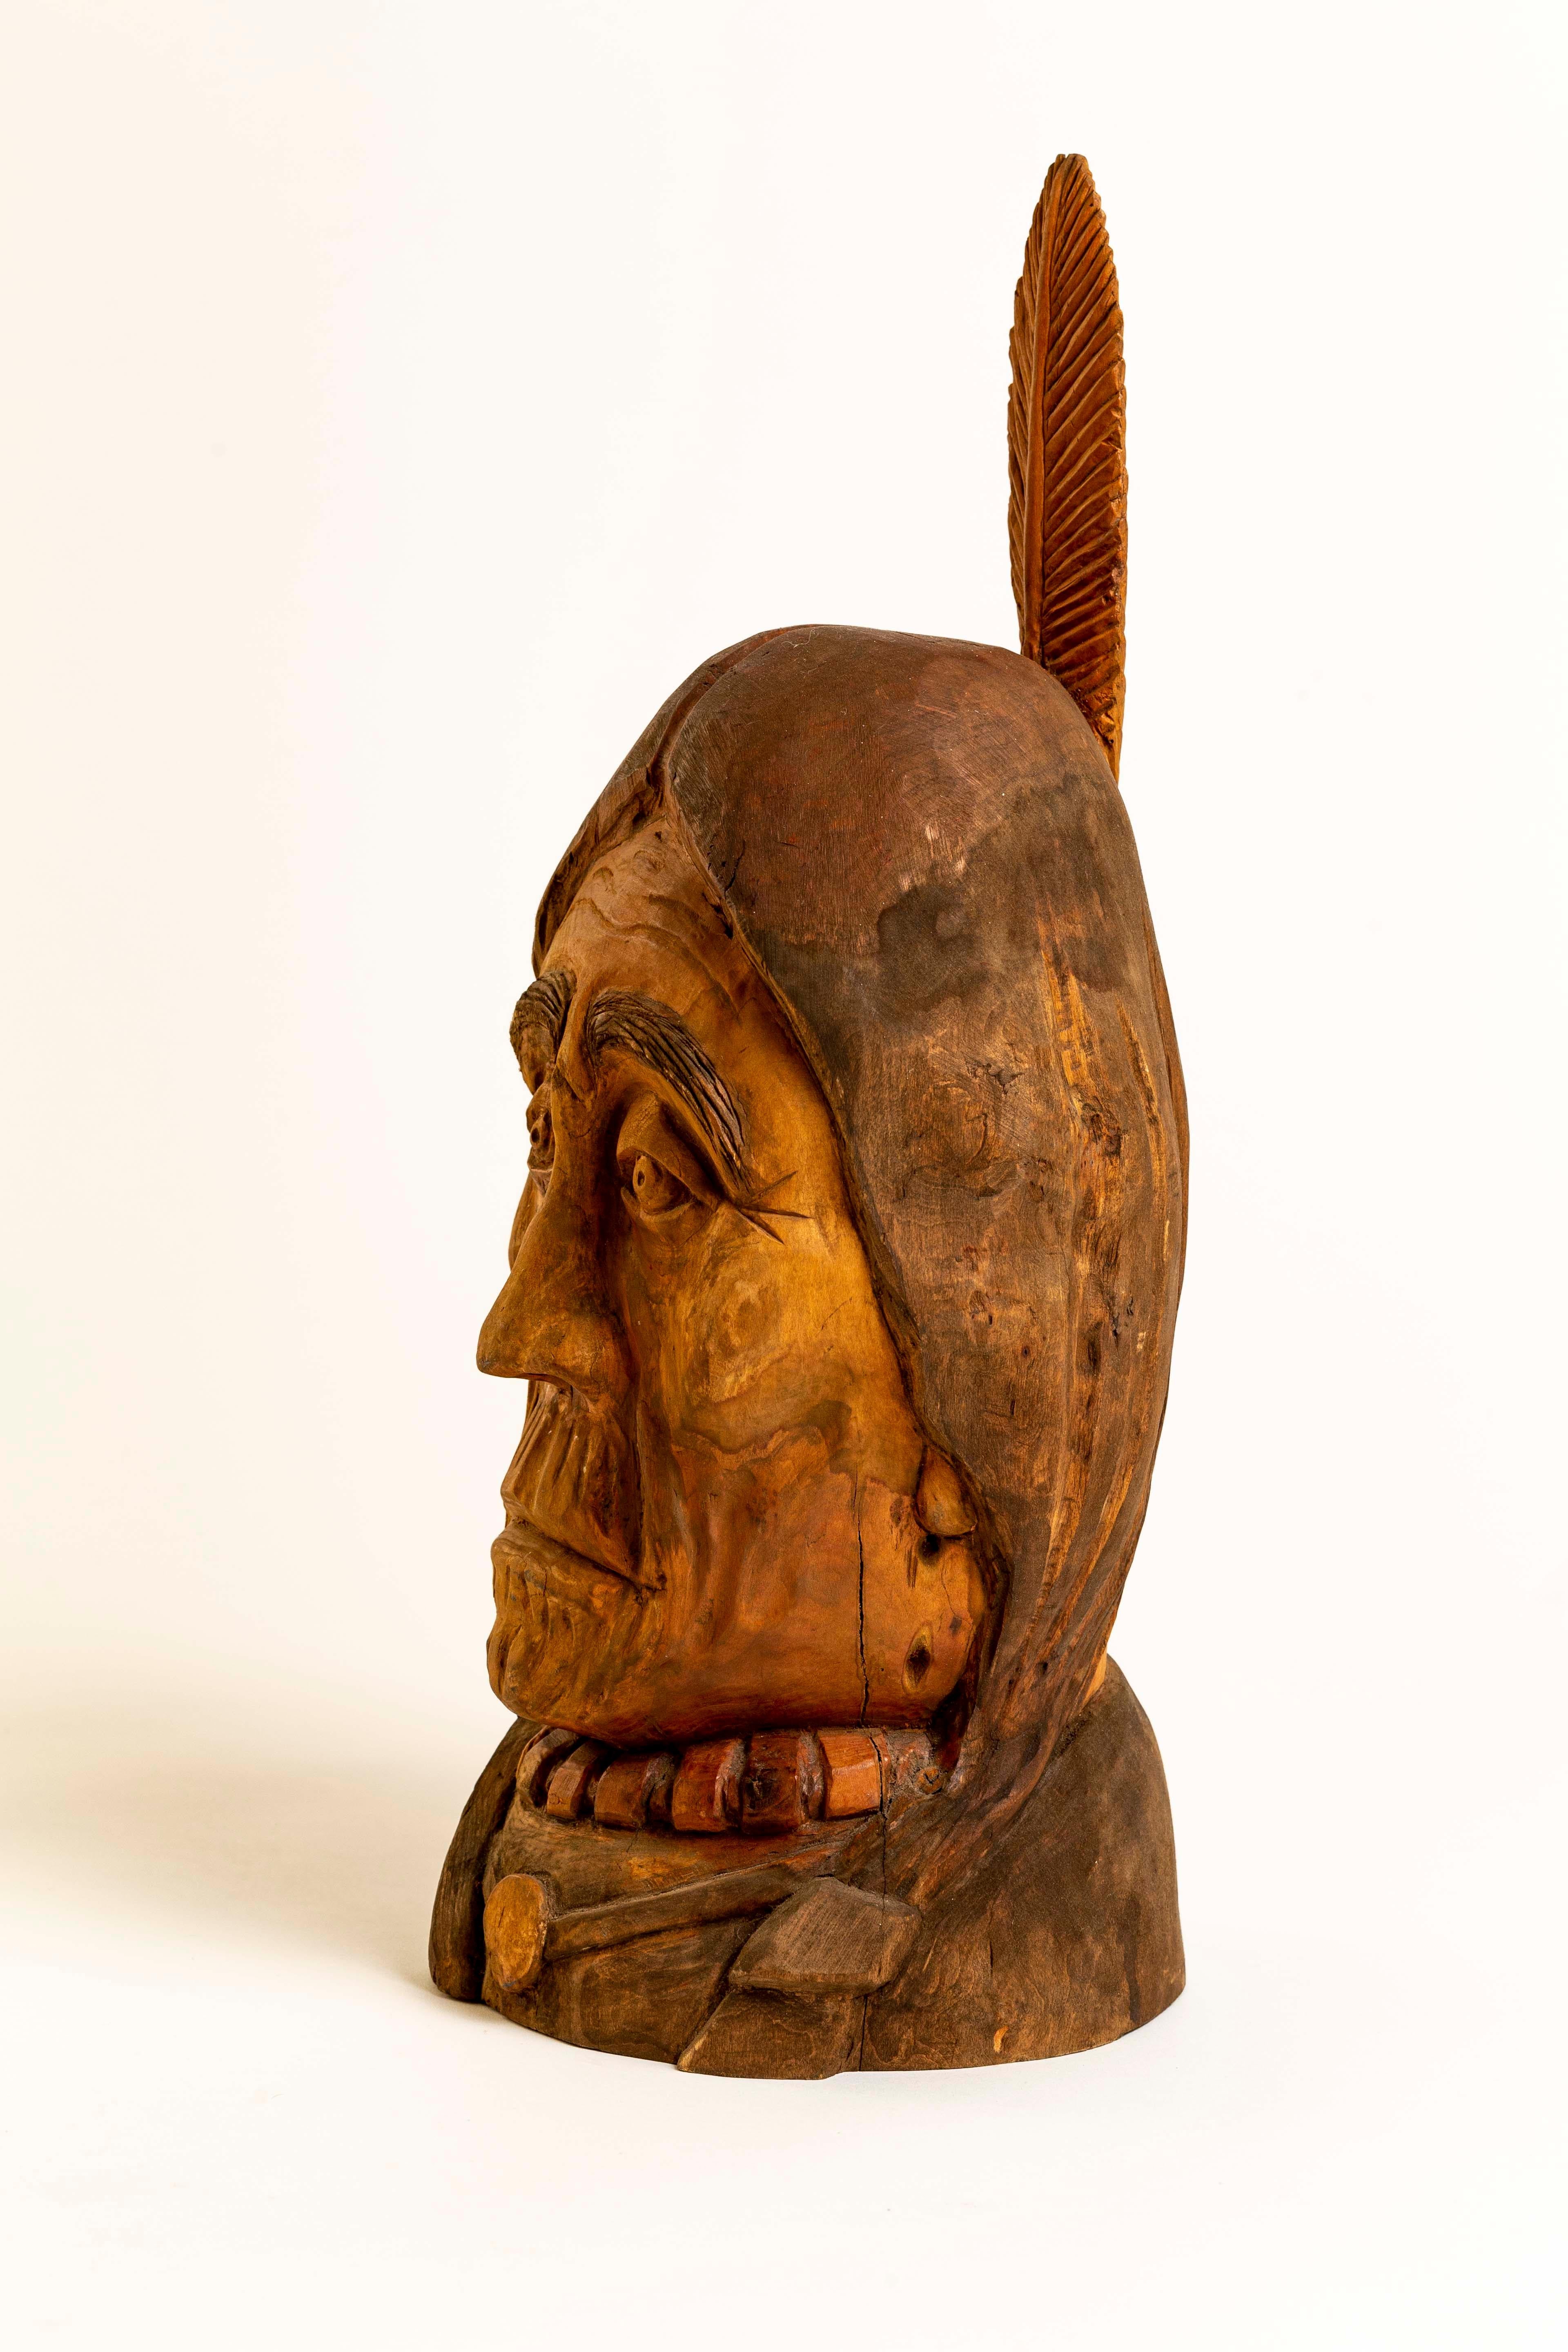 Available for your consideration is an original hand carved sculpture by Duane Hansen. 
This object of art depicts a Native American gentleman with a single feather in his hair. His gaze is captivating and face is very detailed and expressive. An